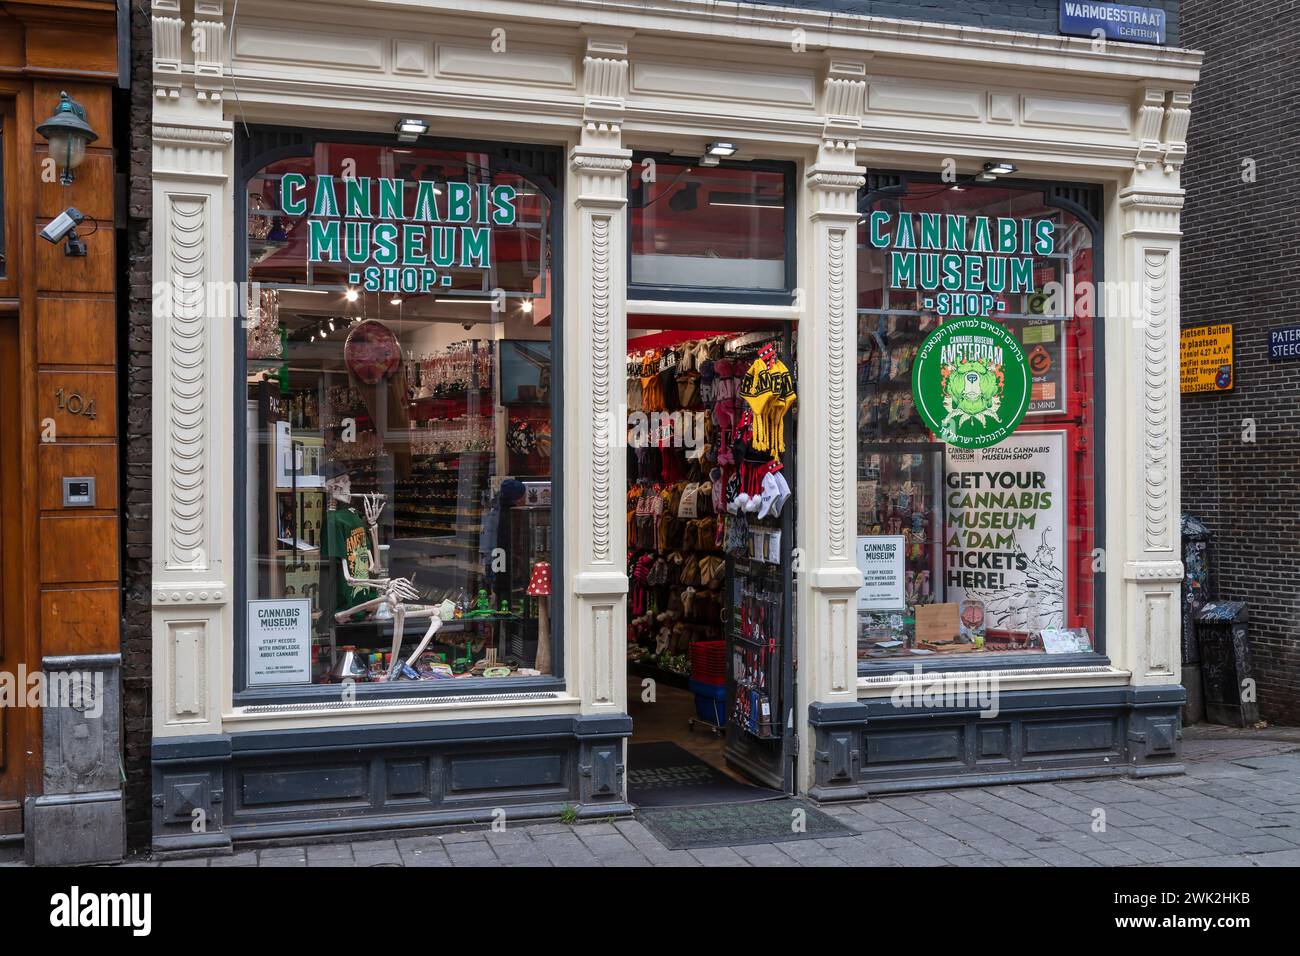 Cannabis museum in one of the oldest streets in Amsterdam - De Warmoesstraat, near the red light district. Stock Photo